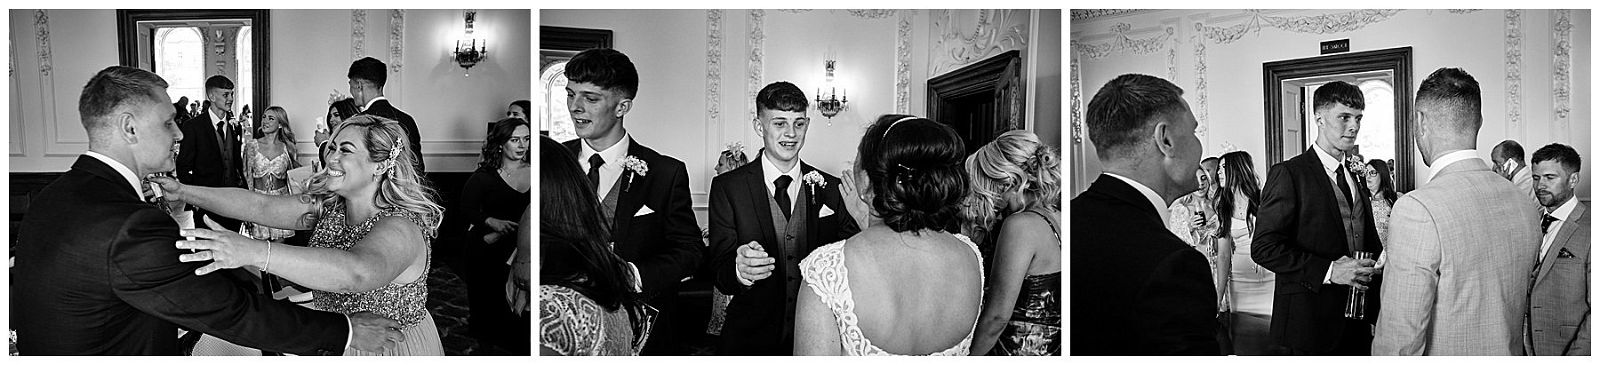 Creative candid photographs of the guests greeting the newlyweds and offering their congratulations at Hawkstone Hall in Shrewsbury by Documentary Wedding Photographer Stuart James